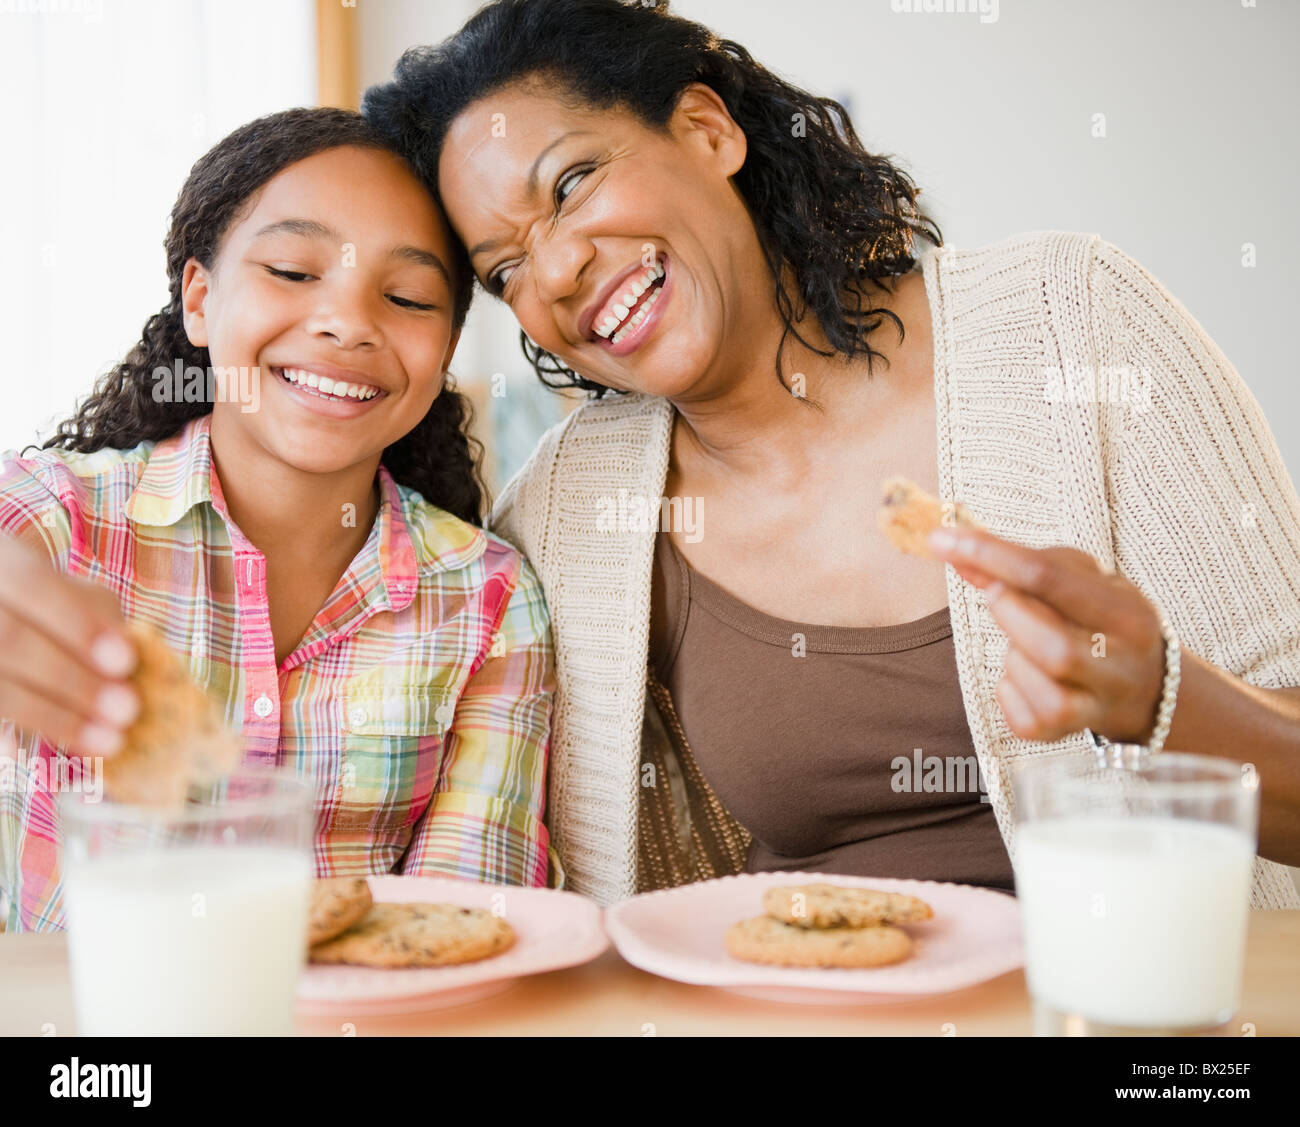 Mother and Daughter eating cookies et le lait Banque D'Images